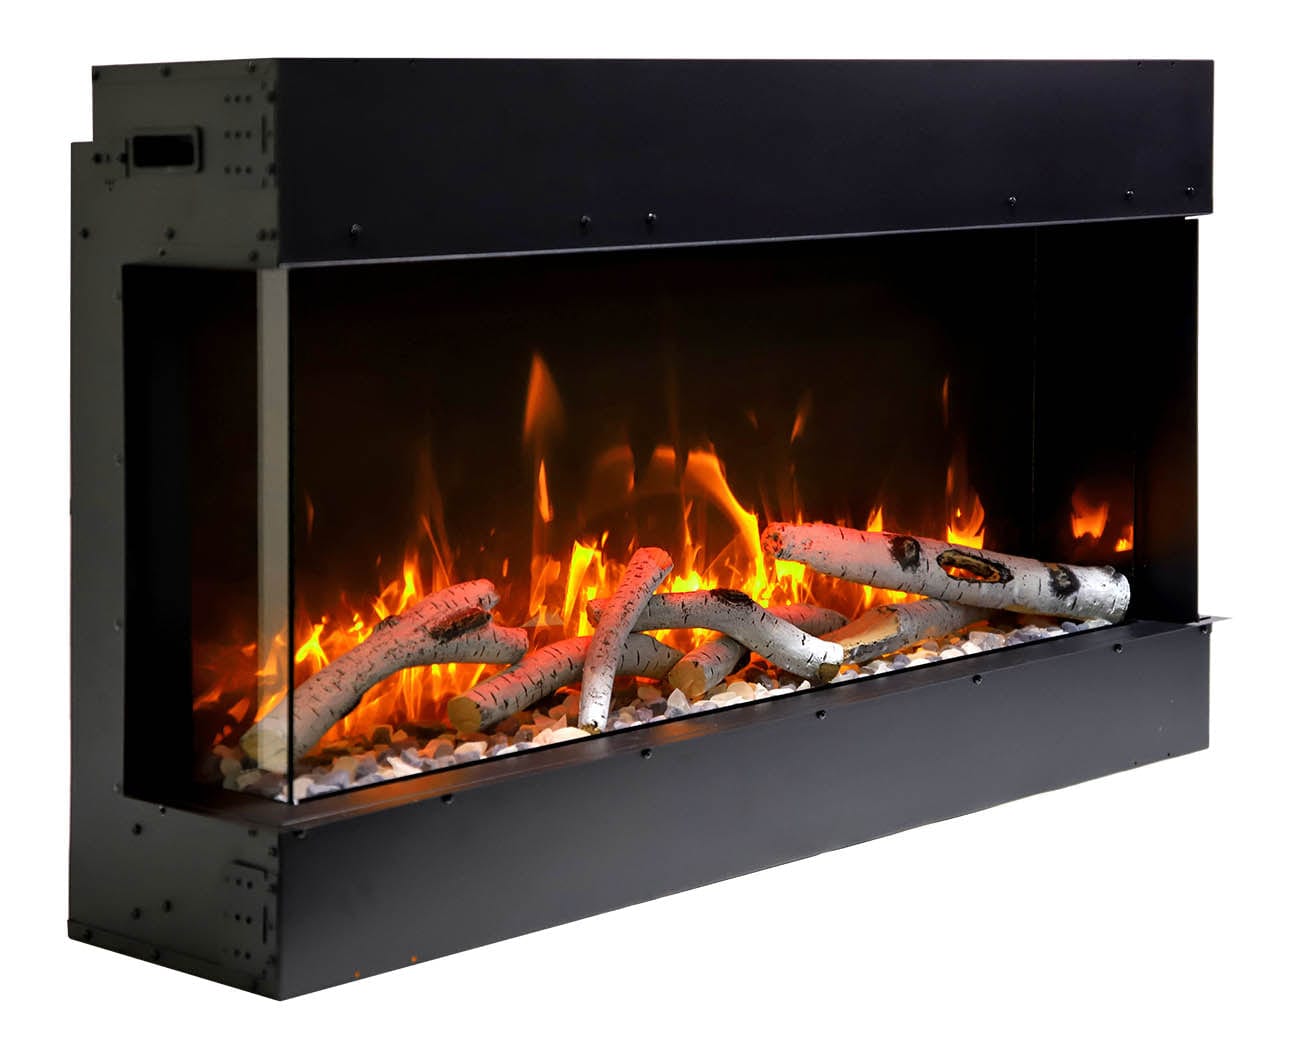 Remii Electric Fireplace Remii - 30-BAY-SLIM – 3 Sided Electric Fireplace 30-BAY-SLIM Remii 30-BAY-SLIM – 3 Sided Electric Fireplace | FirePitsUSA.com